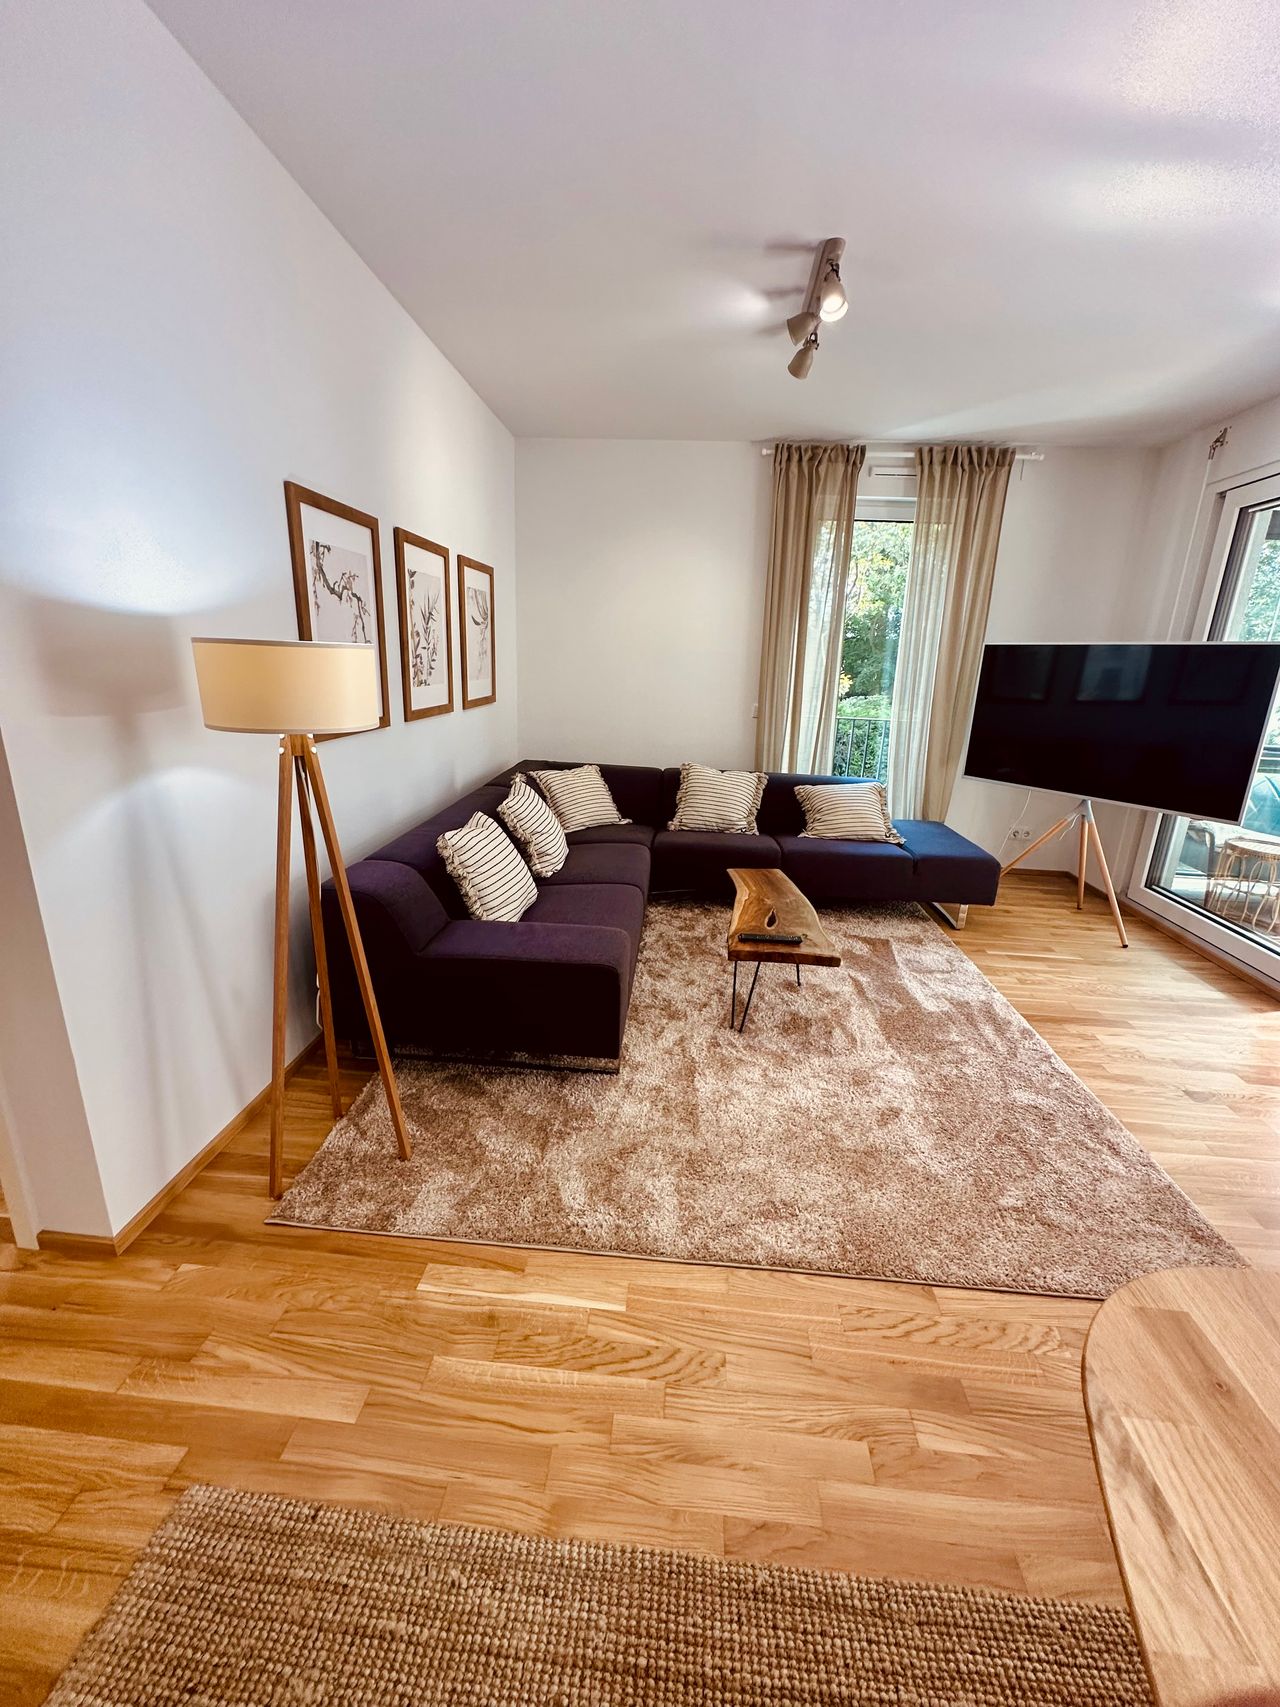 New and fantastic loft in Wiesbaden - Super central